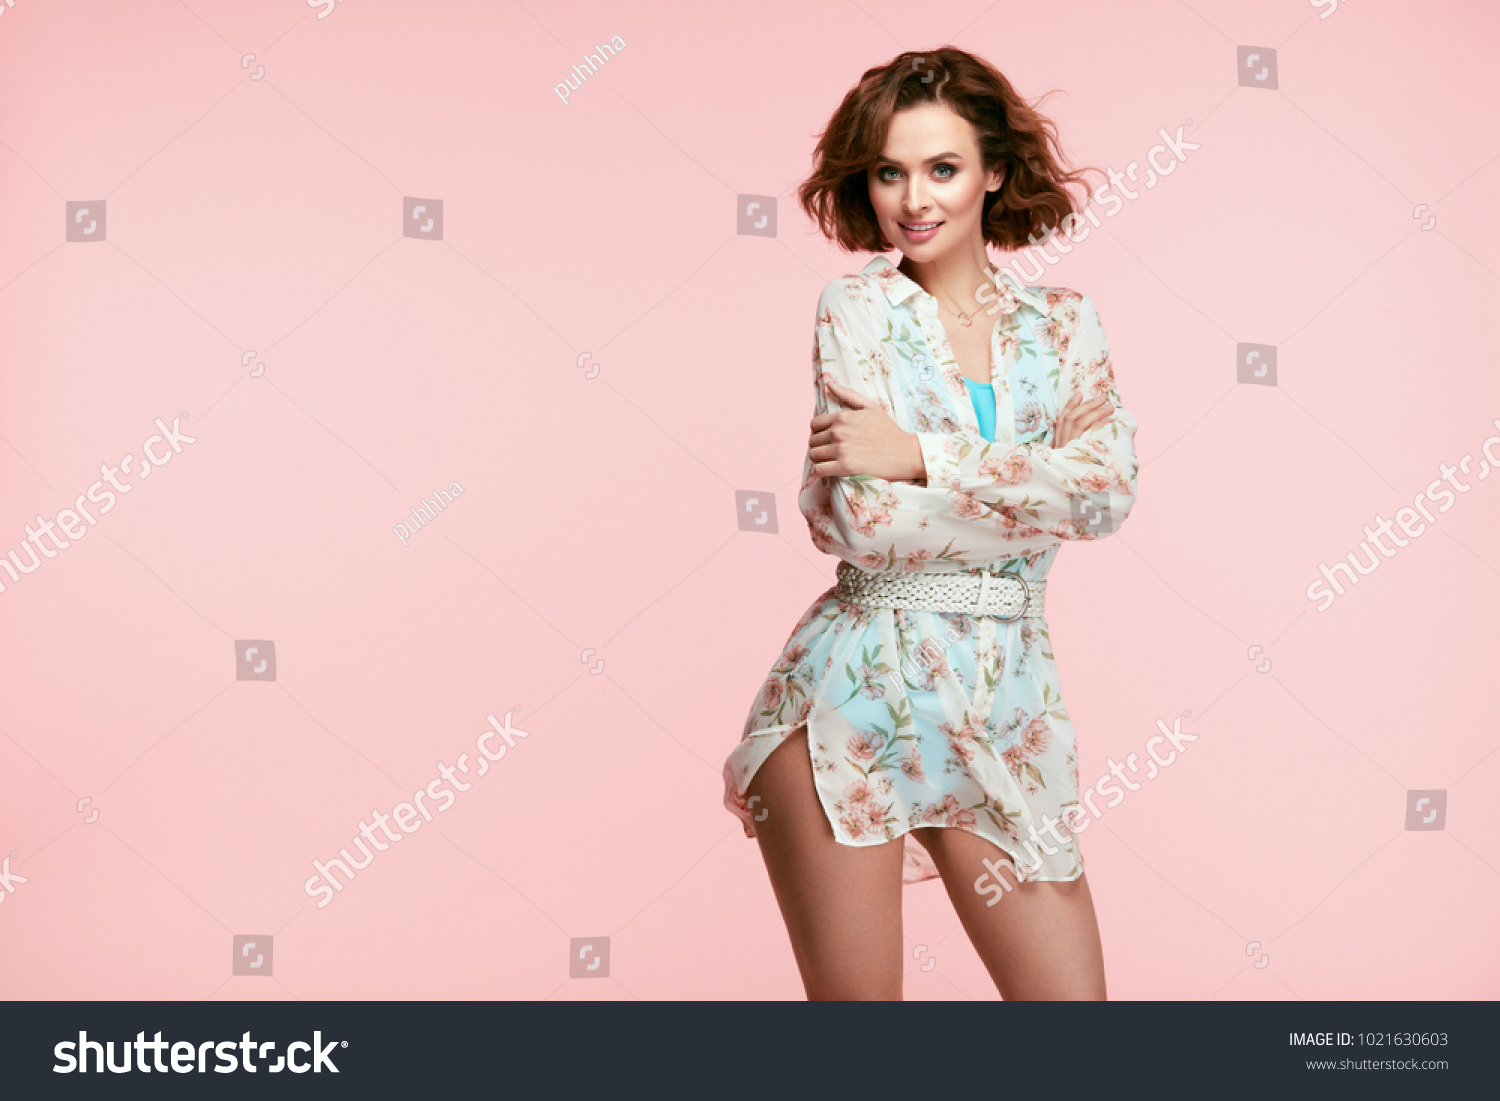 Women Fashion. Beautiful Girl In Stylish Clothes. Portrait Of Smiling Young Fashionable Woman With Beauty Face And Curly Hair In Trendy Spring Clothes In Pastel Colors Indoors. High Quality Image. #1021630603